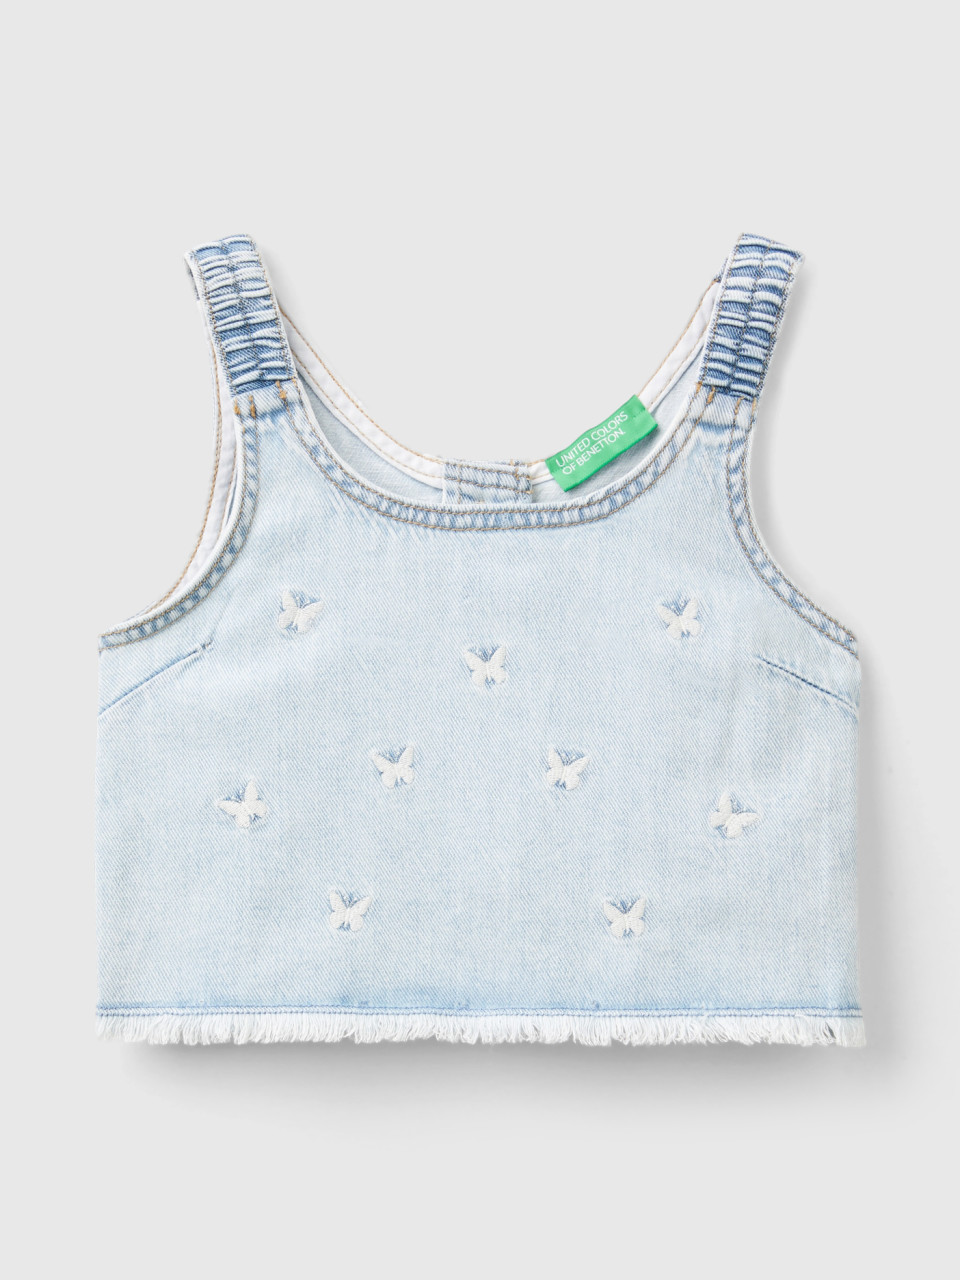 Benetton, Denim Blouse With Butterfly Embroidery, Sky Blue, Kids